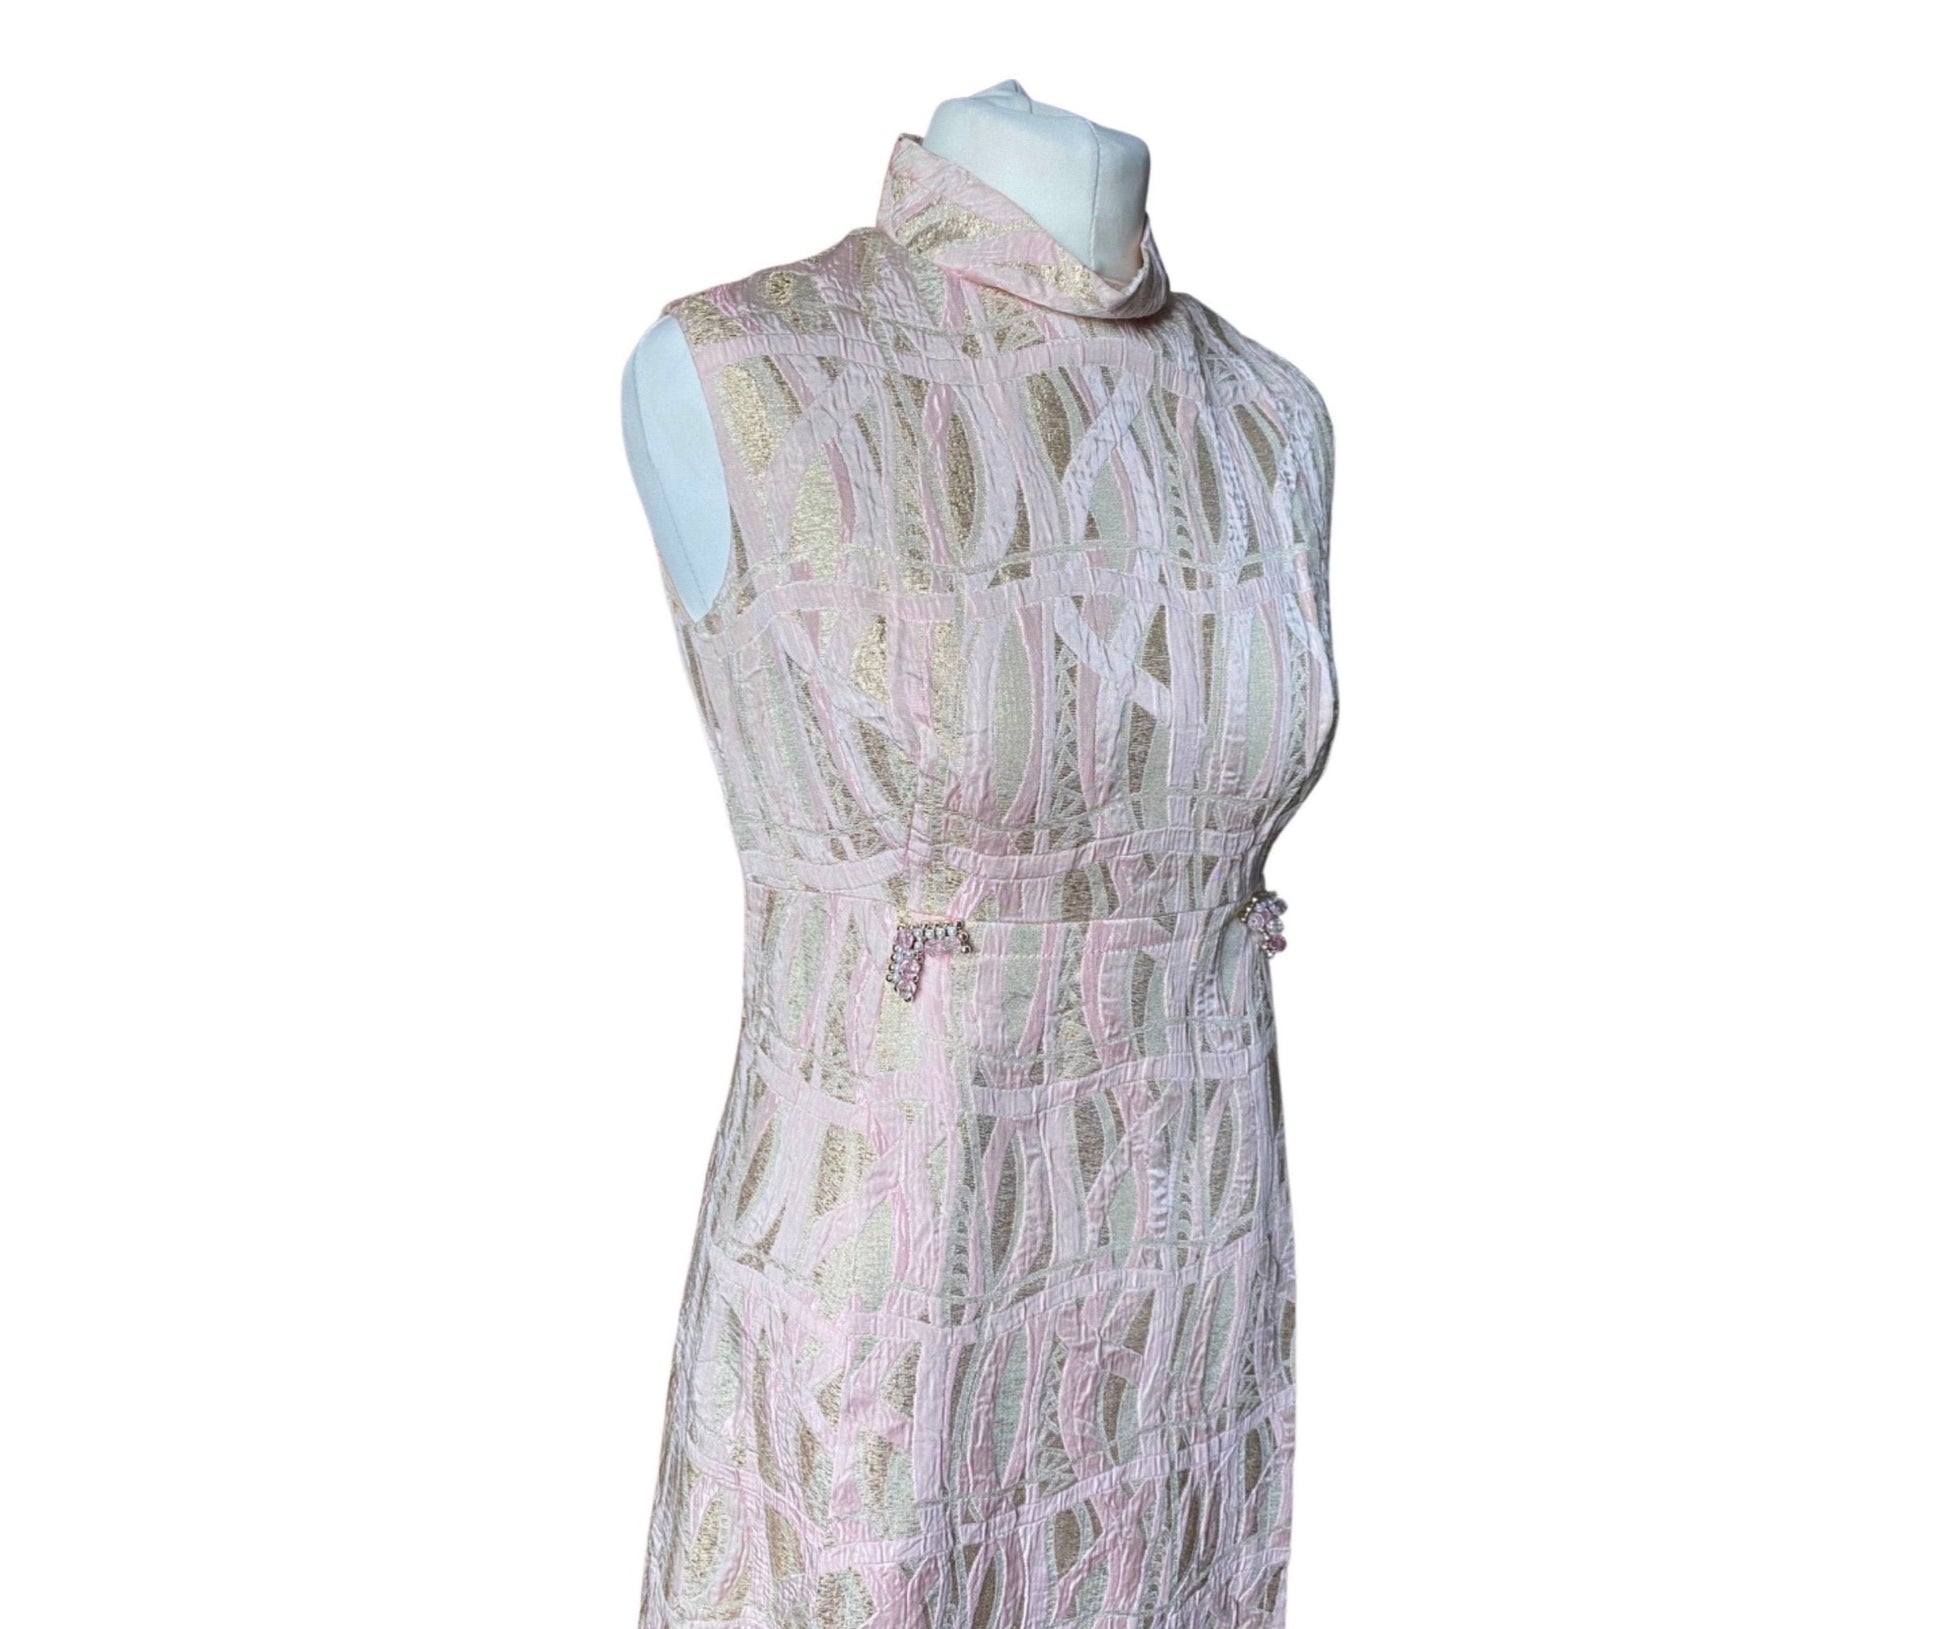 Bodice and high neck of Pink and gold brocade 60s shift dress 